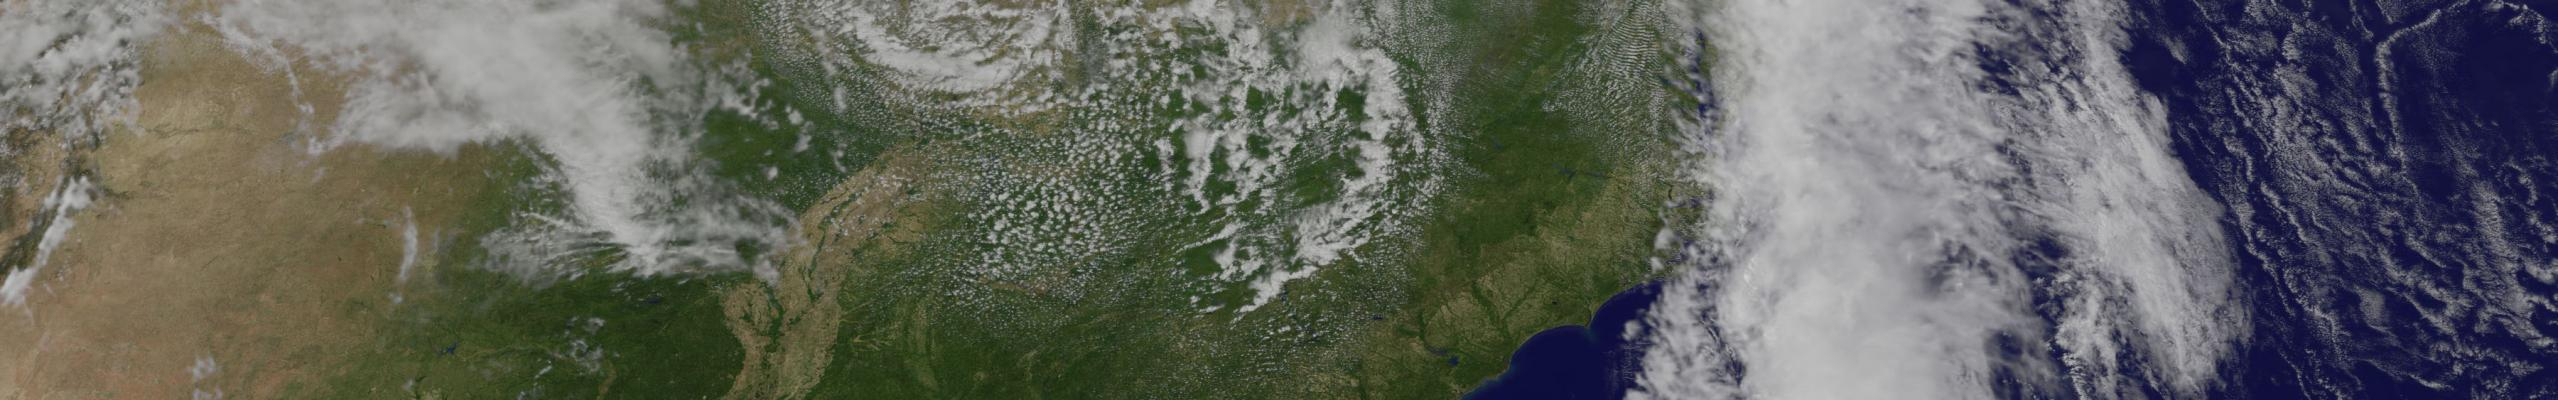 NASA satellite view of clouds over North America